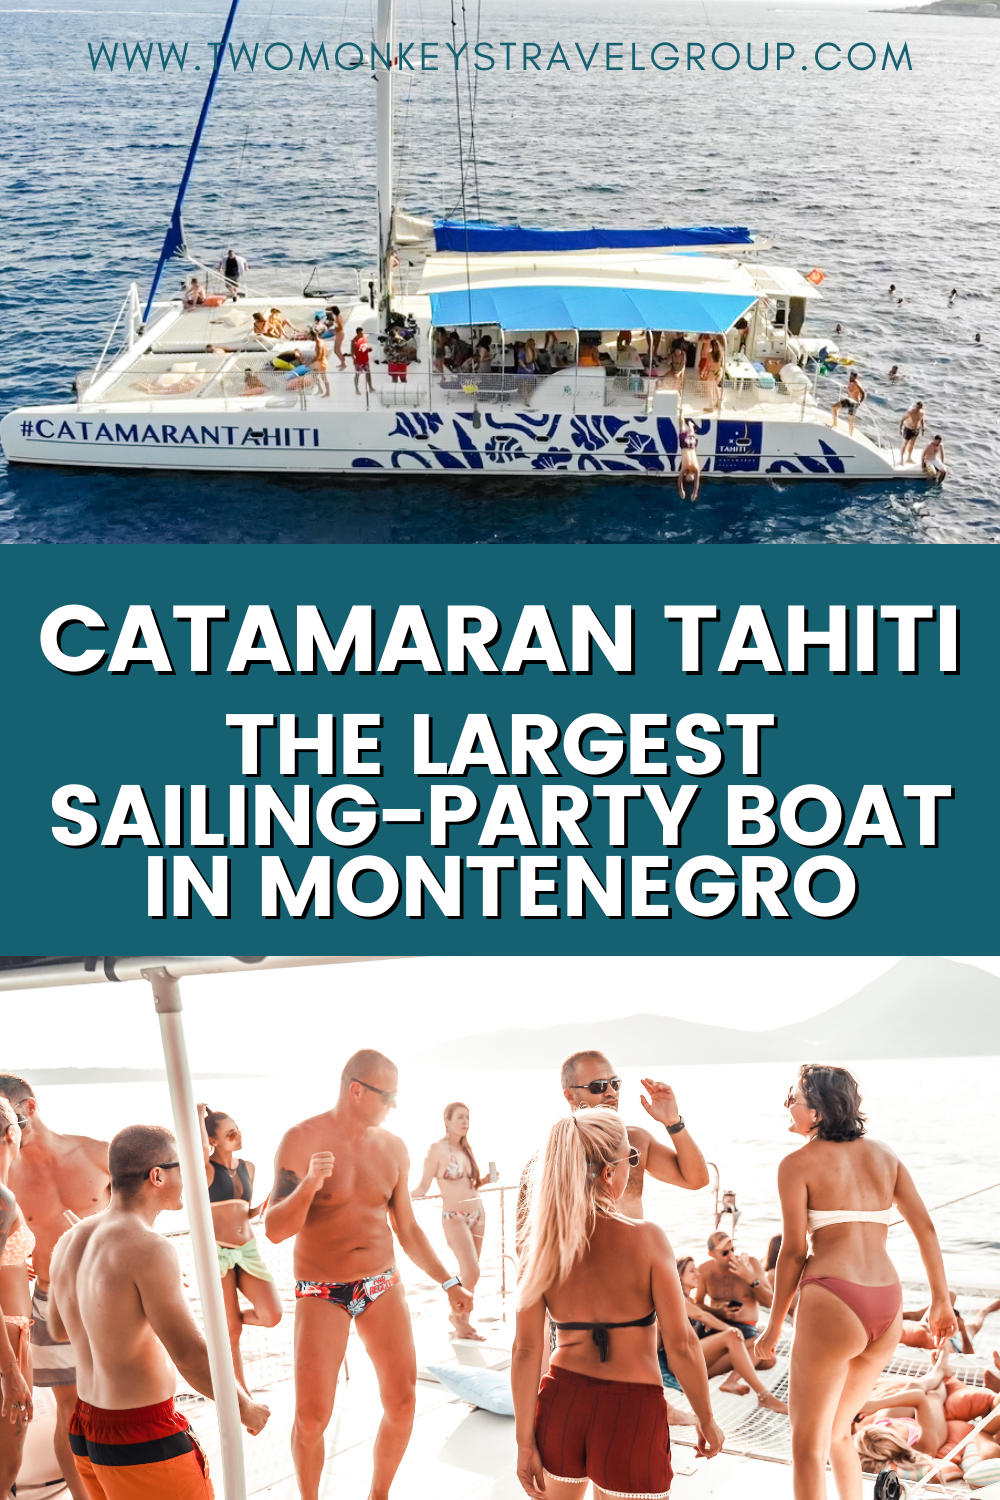 My Birthday Party at Catamaran Tahiti The Largest Sailing Party Boat in Montenegro